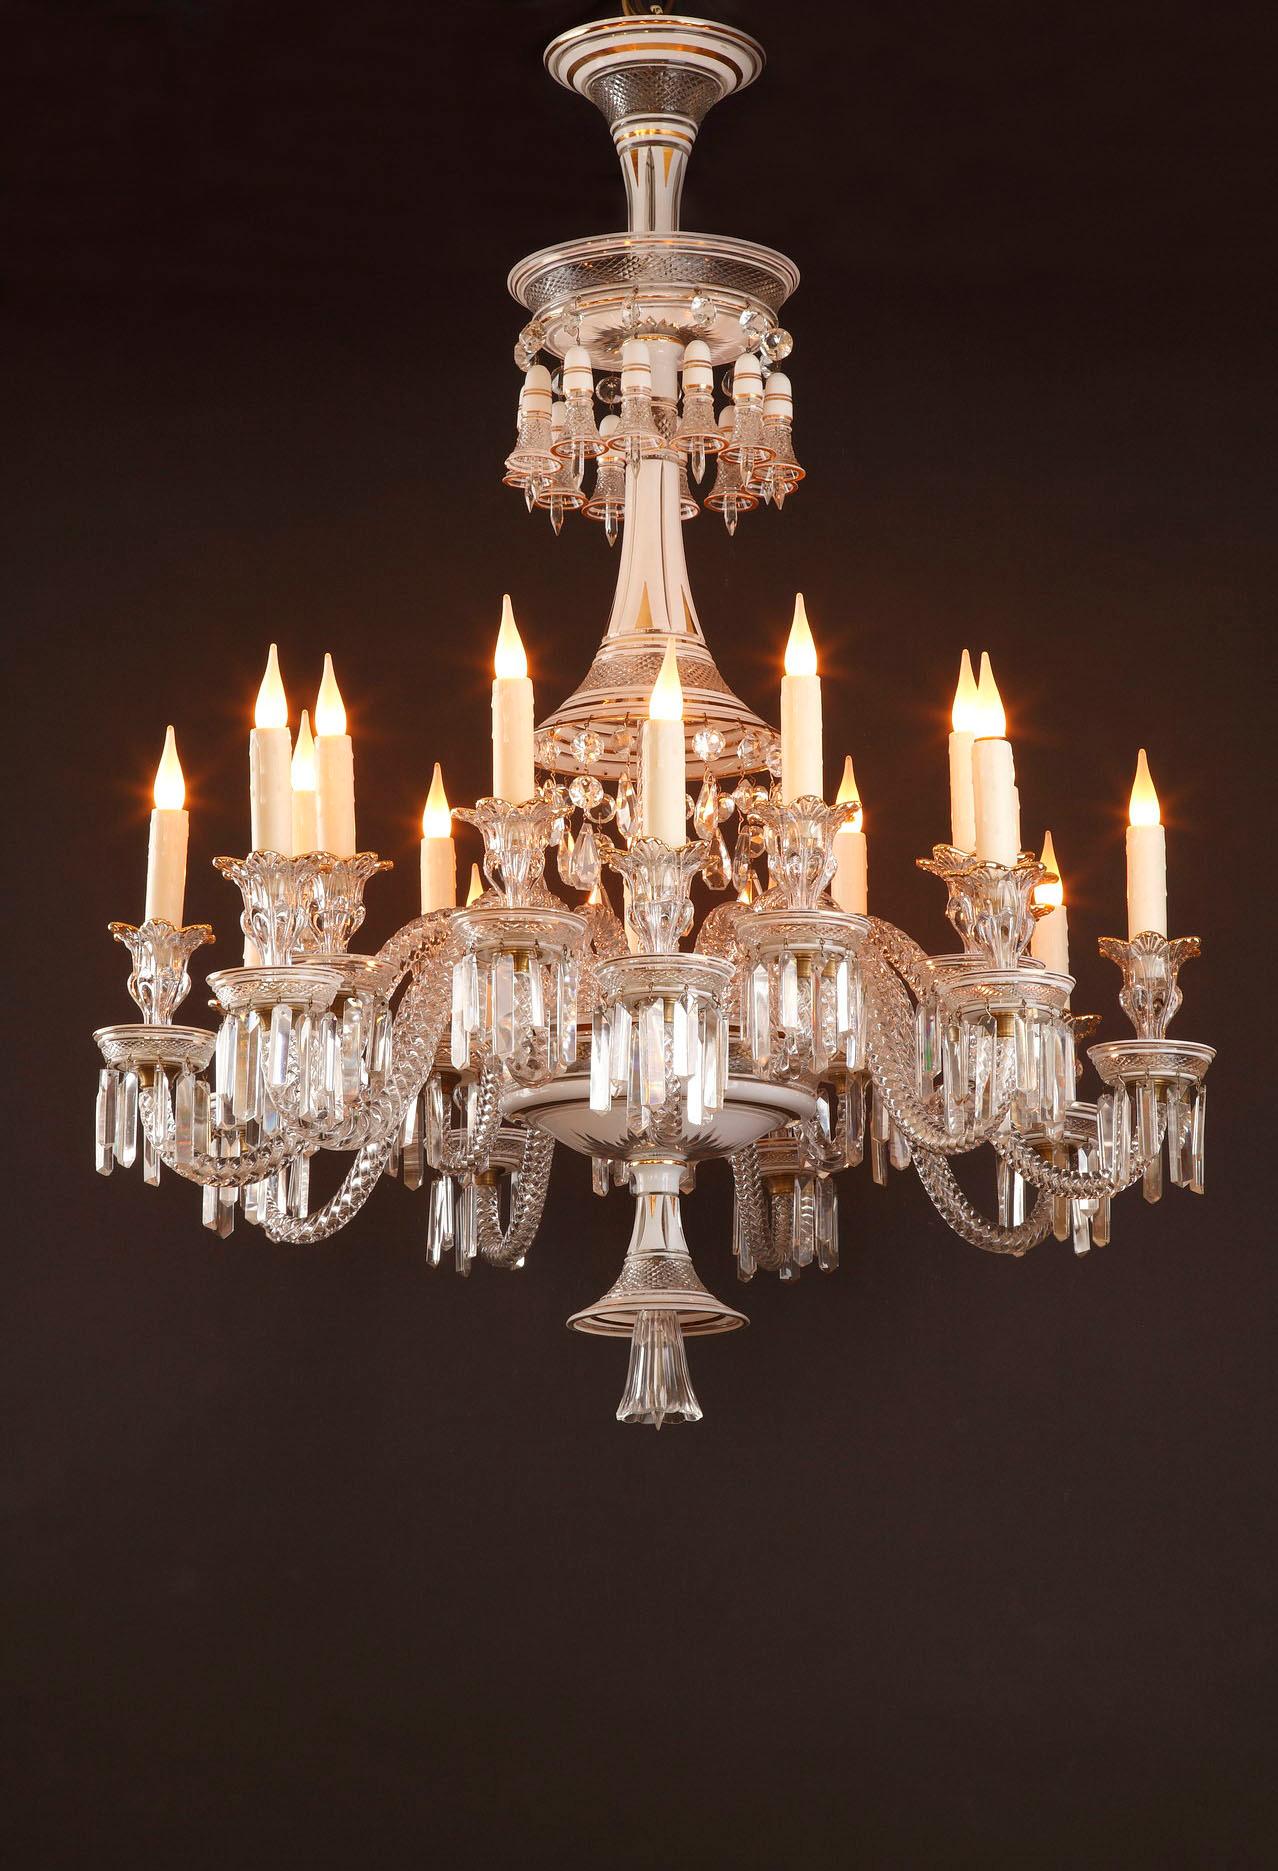 French Opalescent Crystal Chandelier Attributed to Baccarat, France, circa 1890